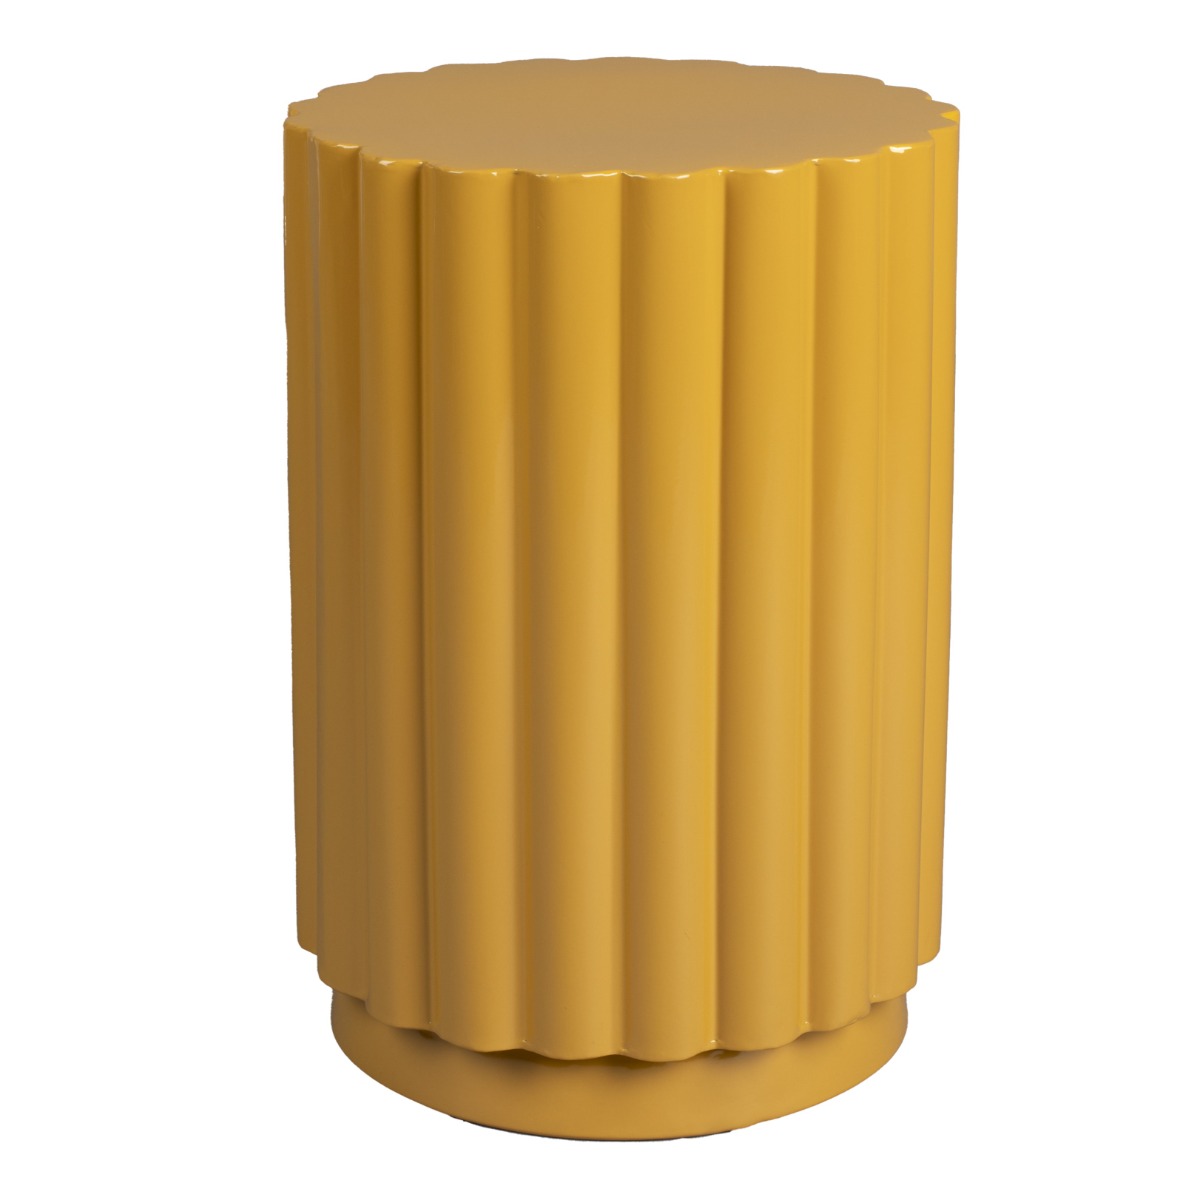 Camilla Stool / Side Table in Yellow